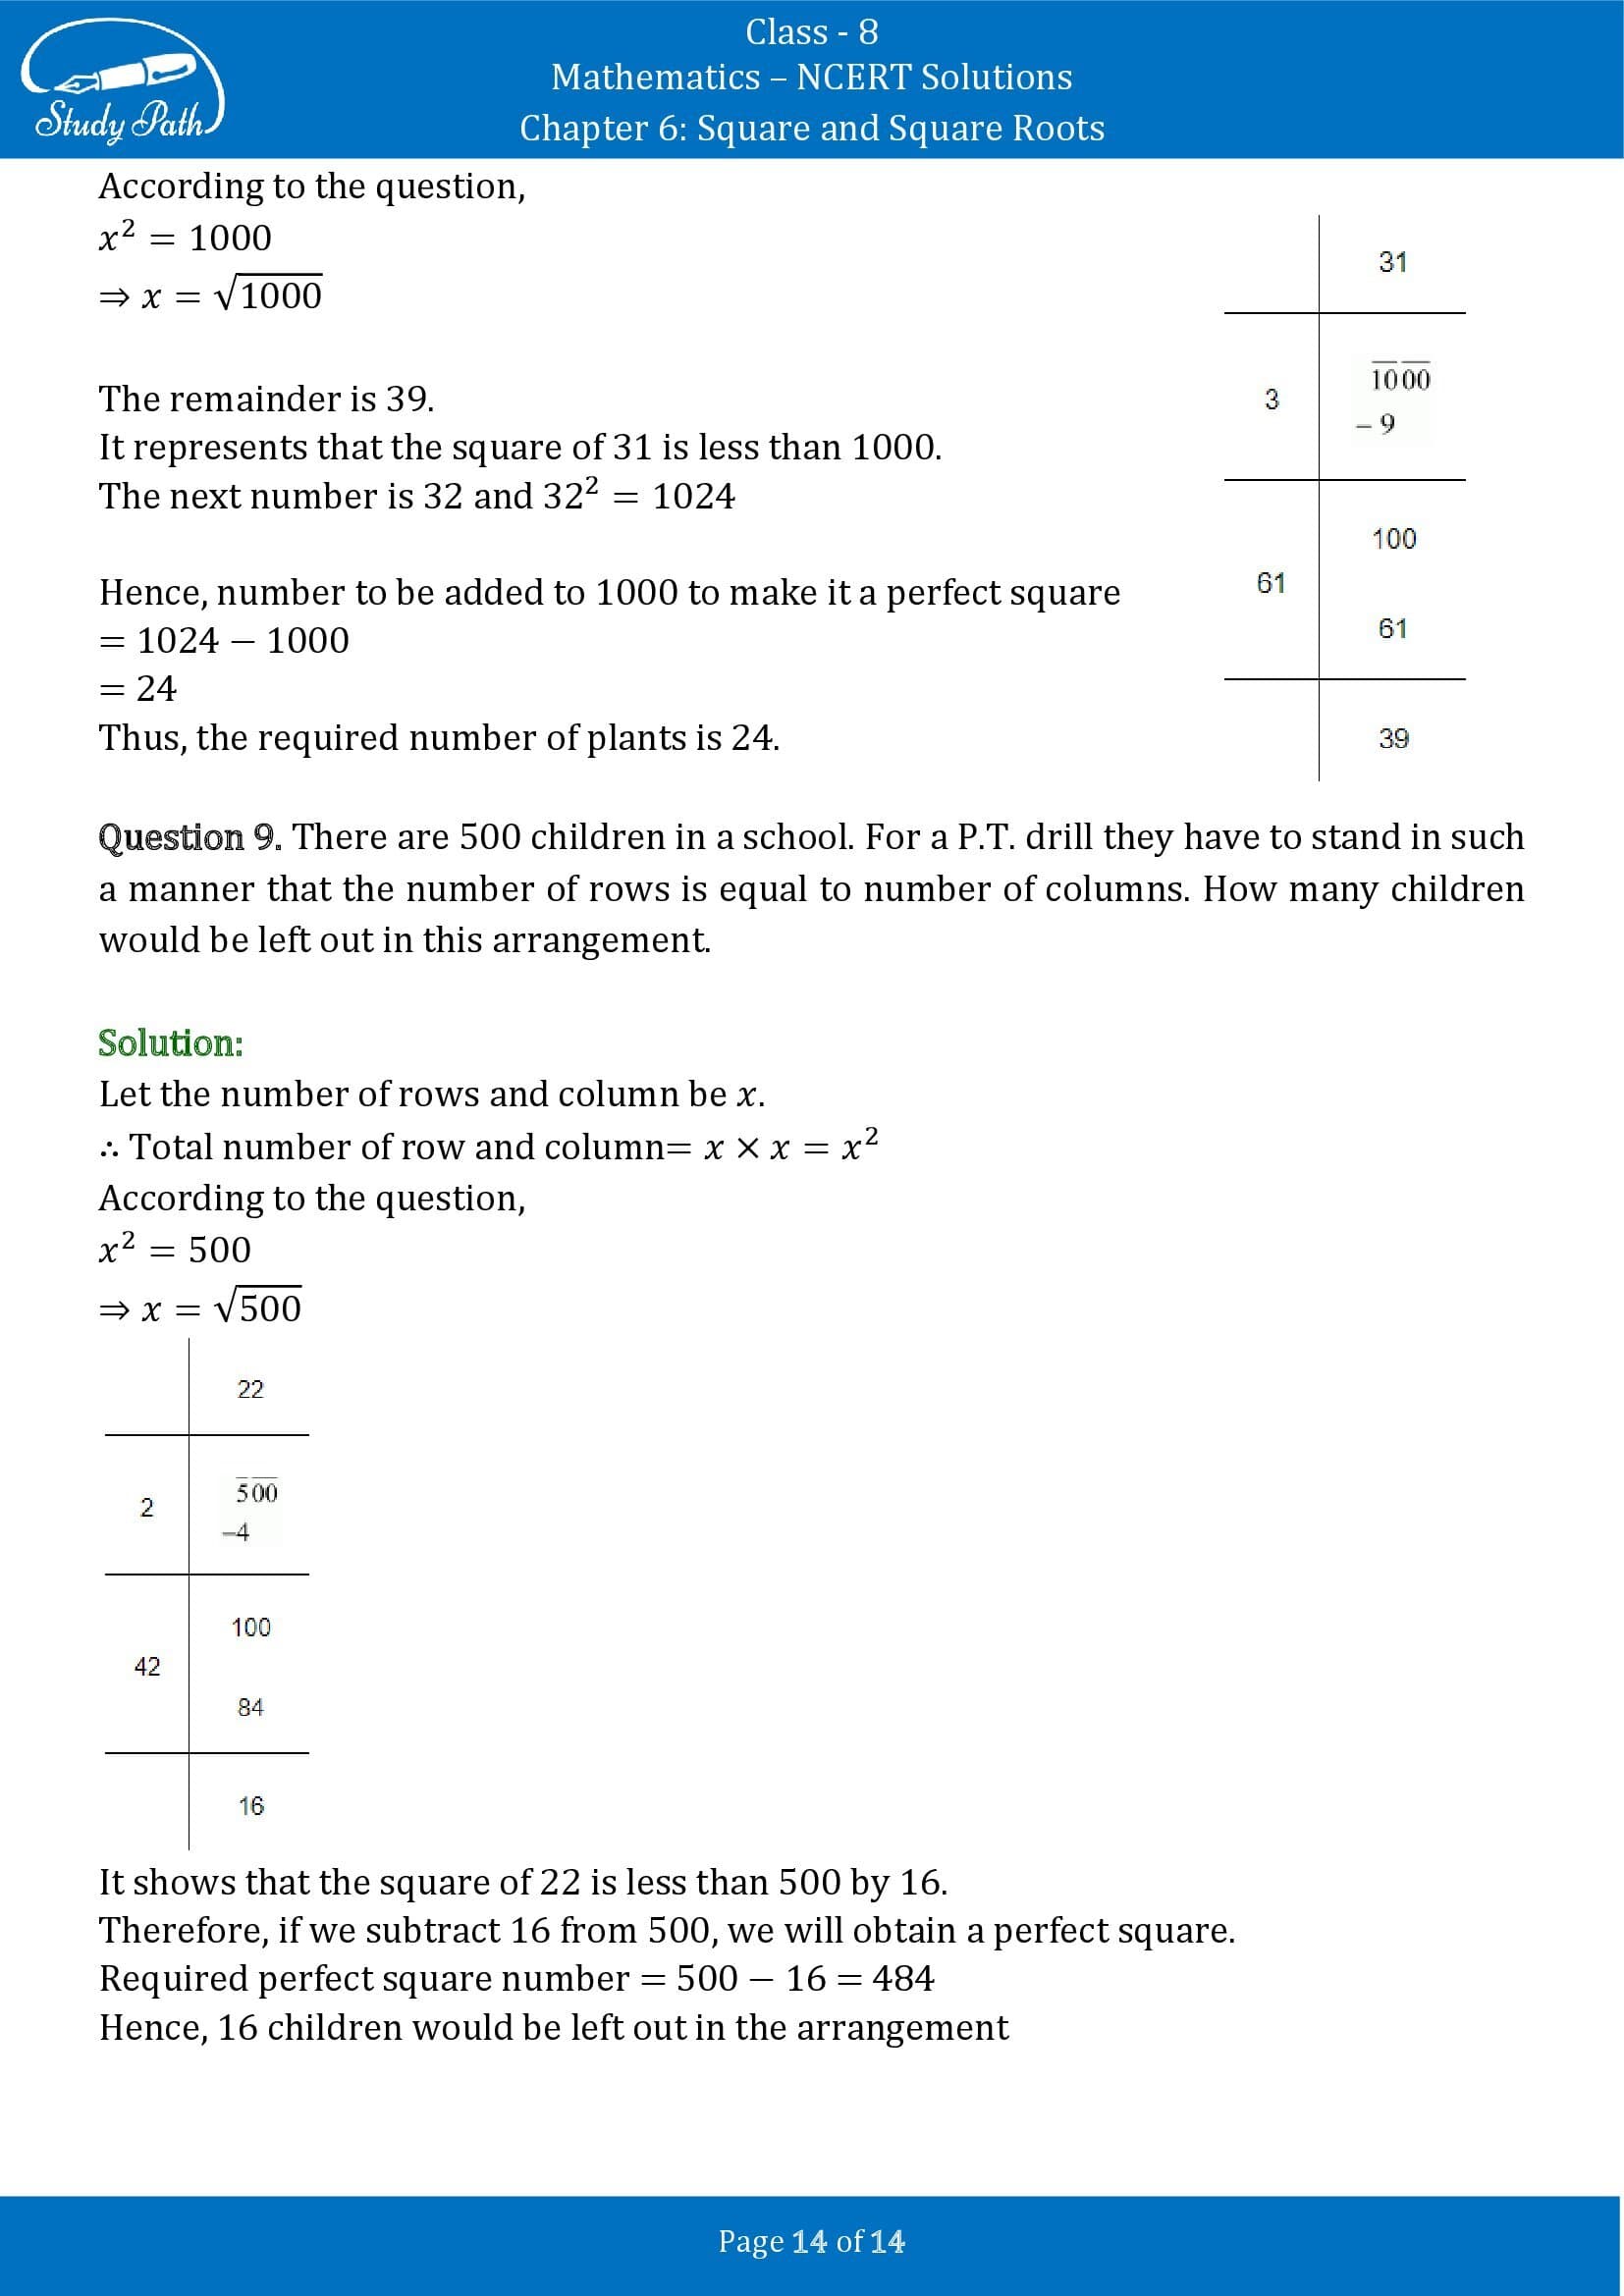 NCERT Solutions for Class 8 Maths Chapter 6 Square and Square Roots Exercise 6.4 00014